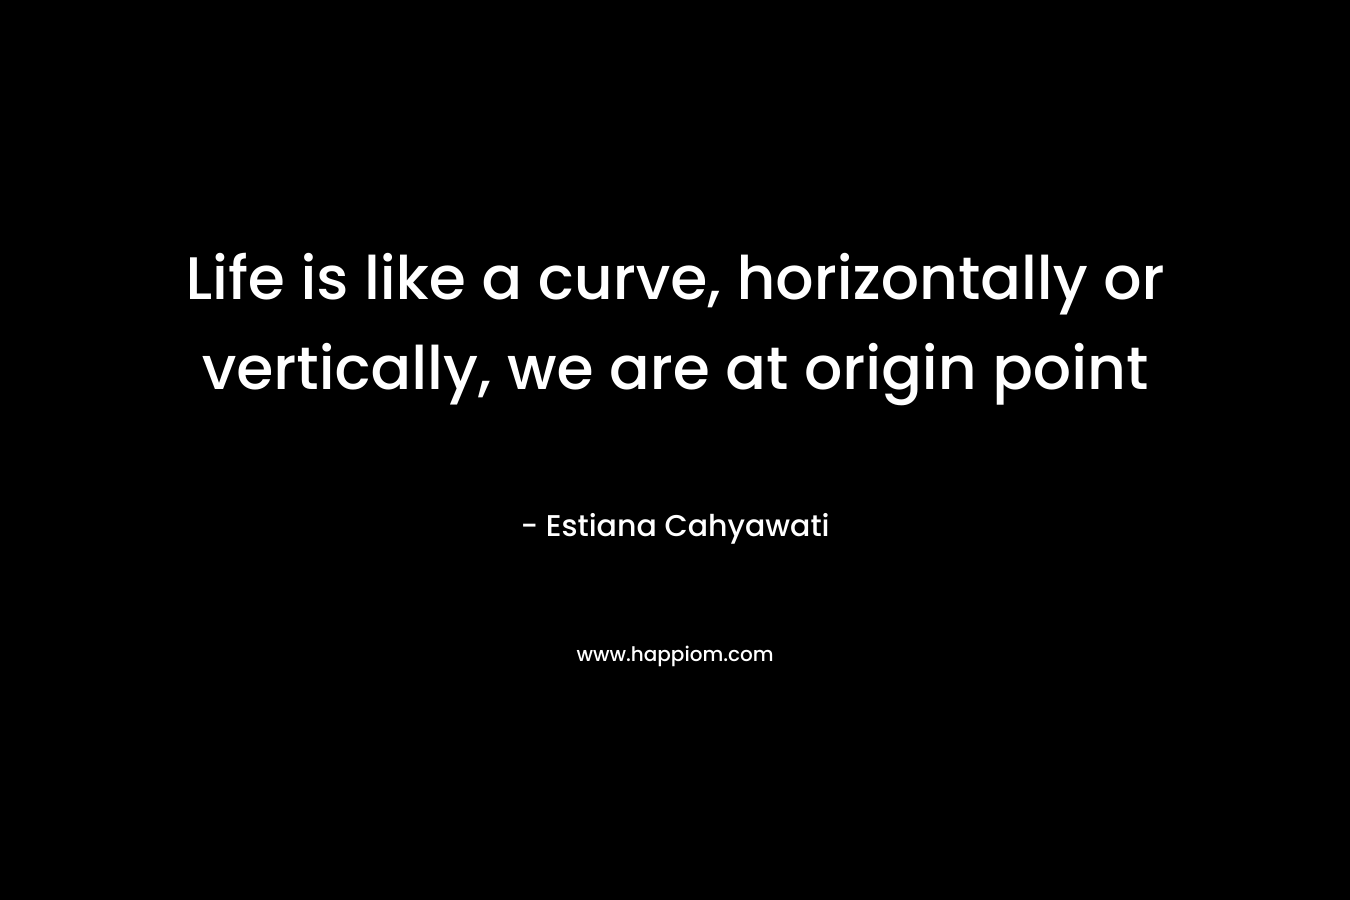 Life is like a curve, horizontally or vertically, we are at origin point – Estiana Cahyawati